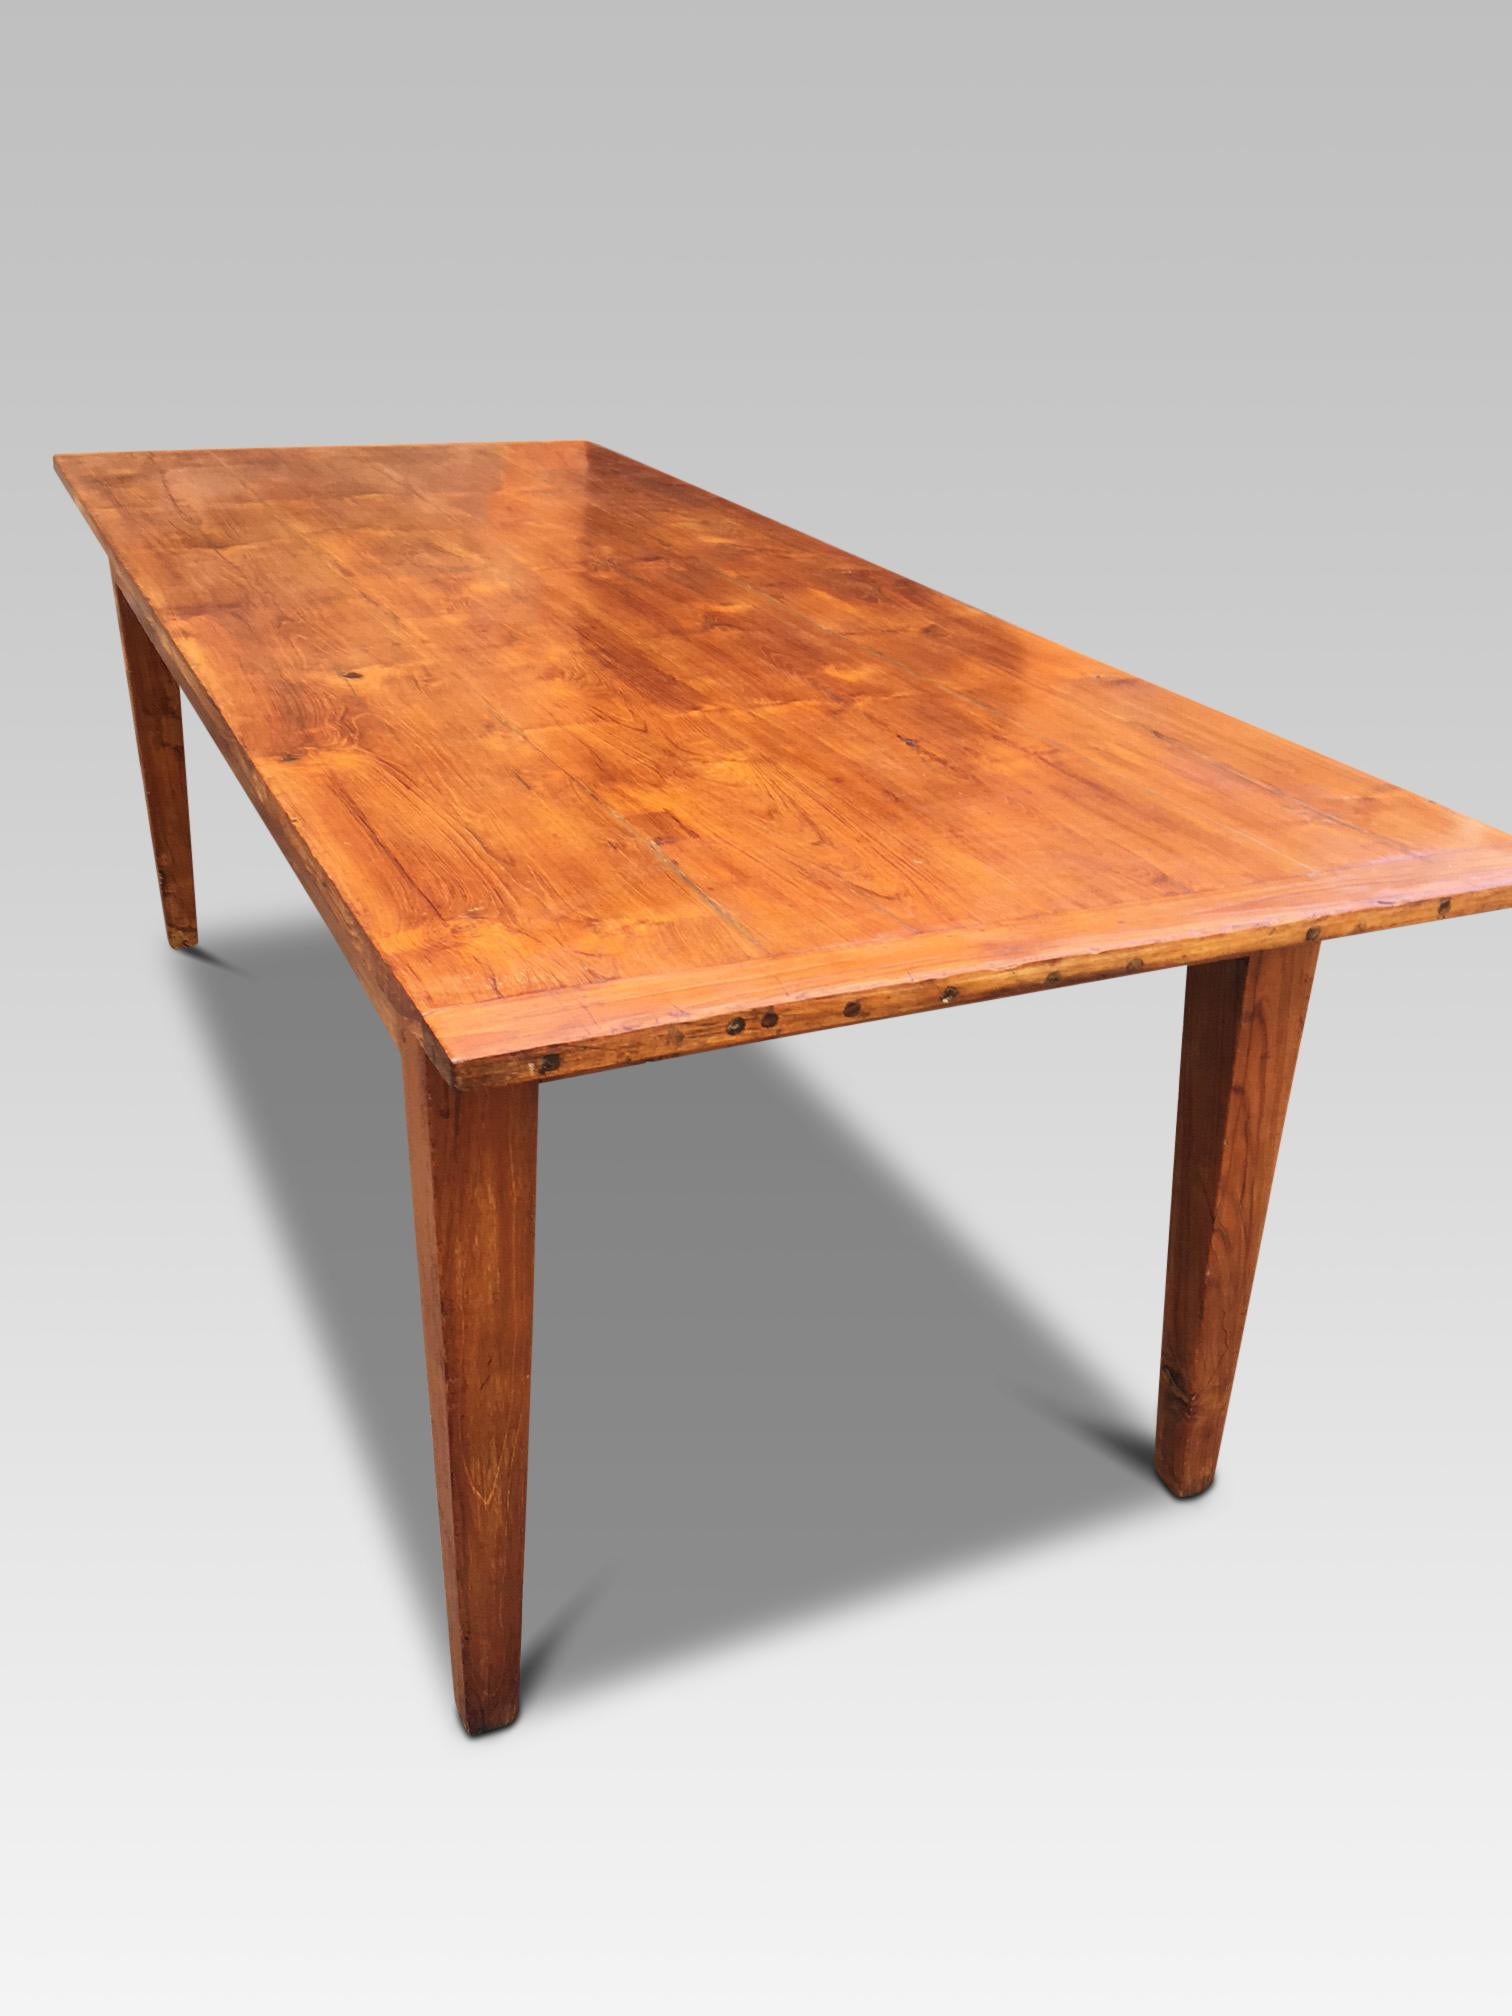 Fine quality Chestnut farmhouse dining table, comfortably seating 8 to 10 people. French, circa 1880 

This large family table is shown here in excellent condition and has the most delightful grain and colour. All the joints are firm and we have